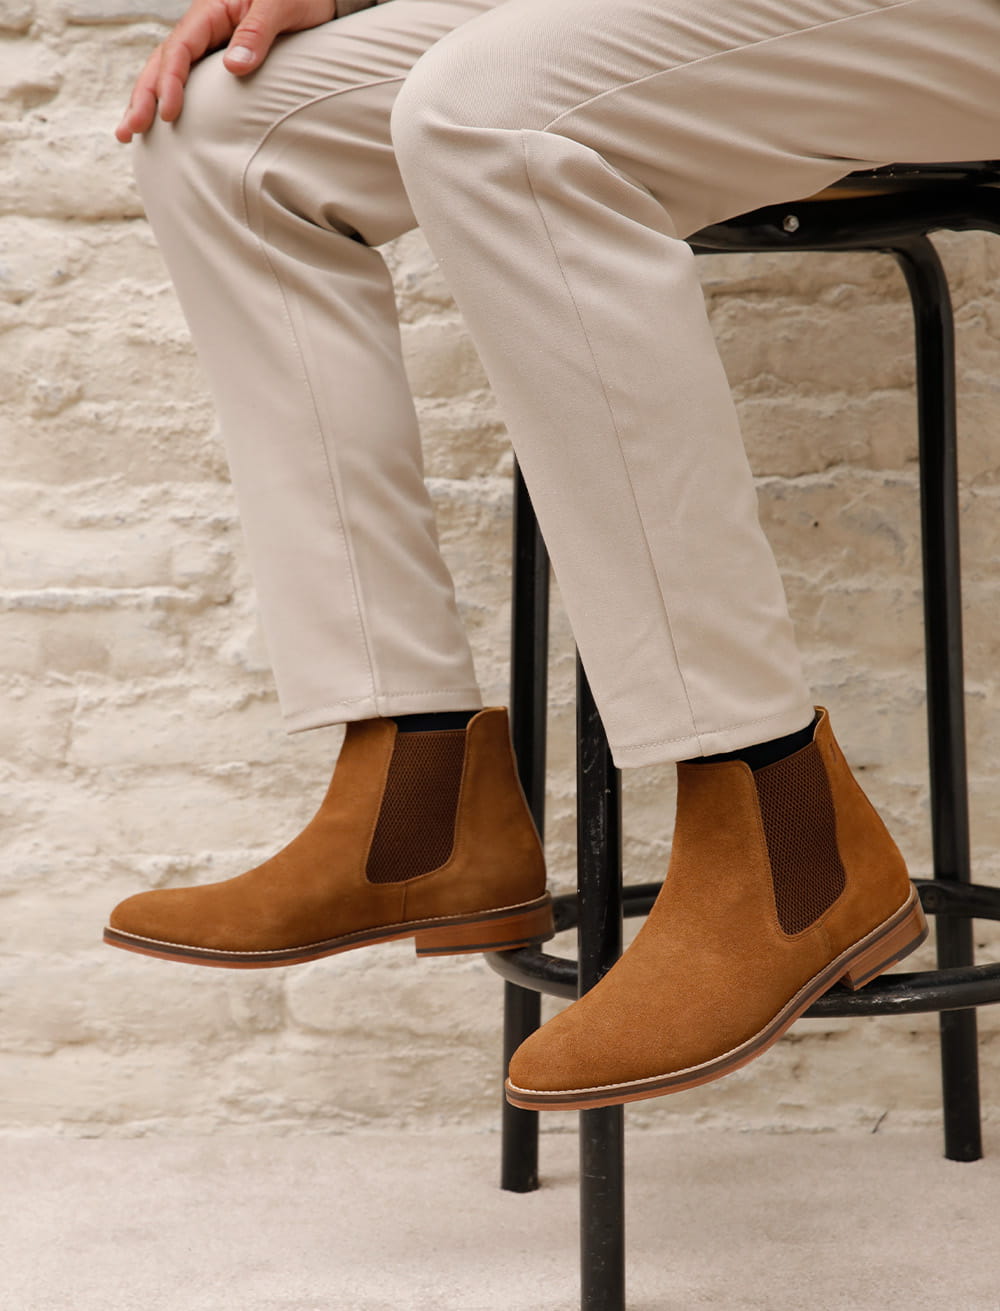 Chelsea Boots Men in Camel Suede Leather - Pied Biche